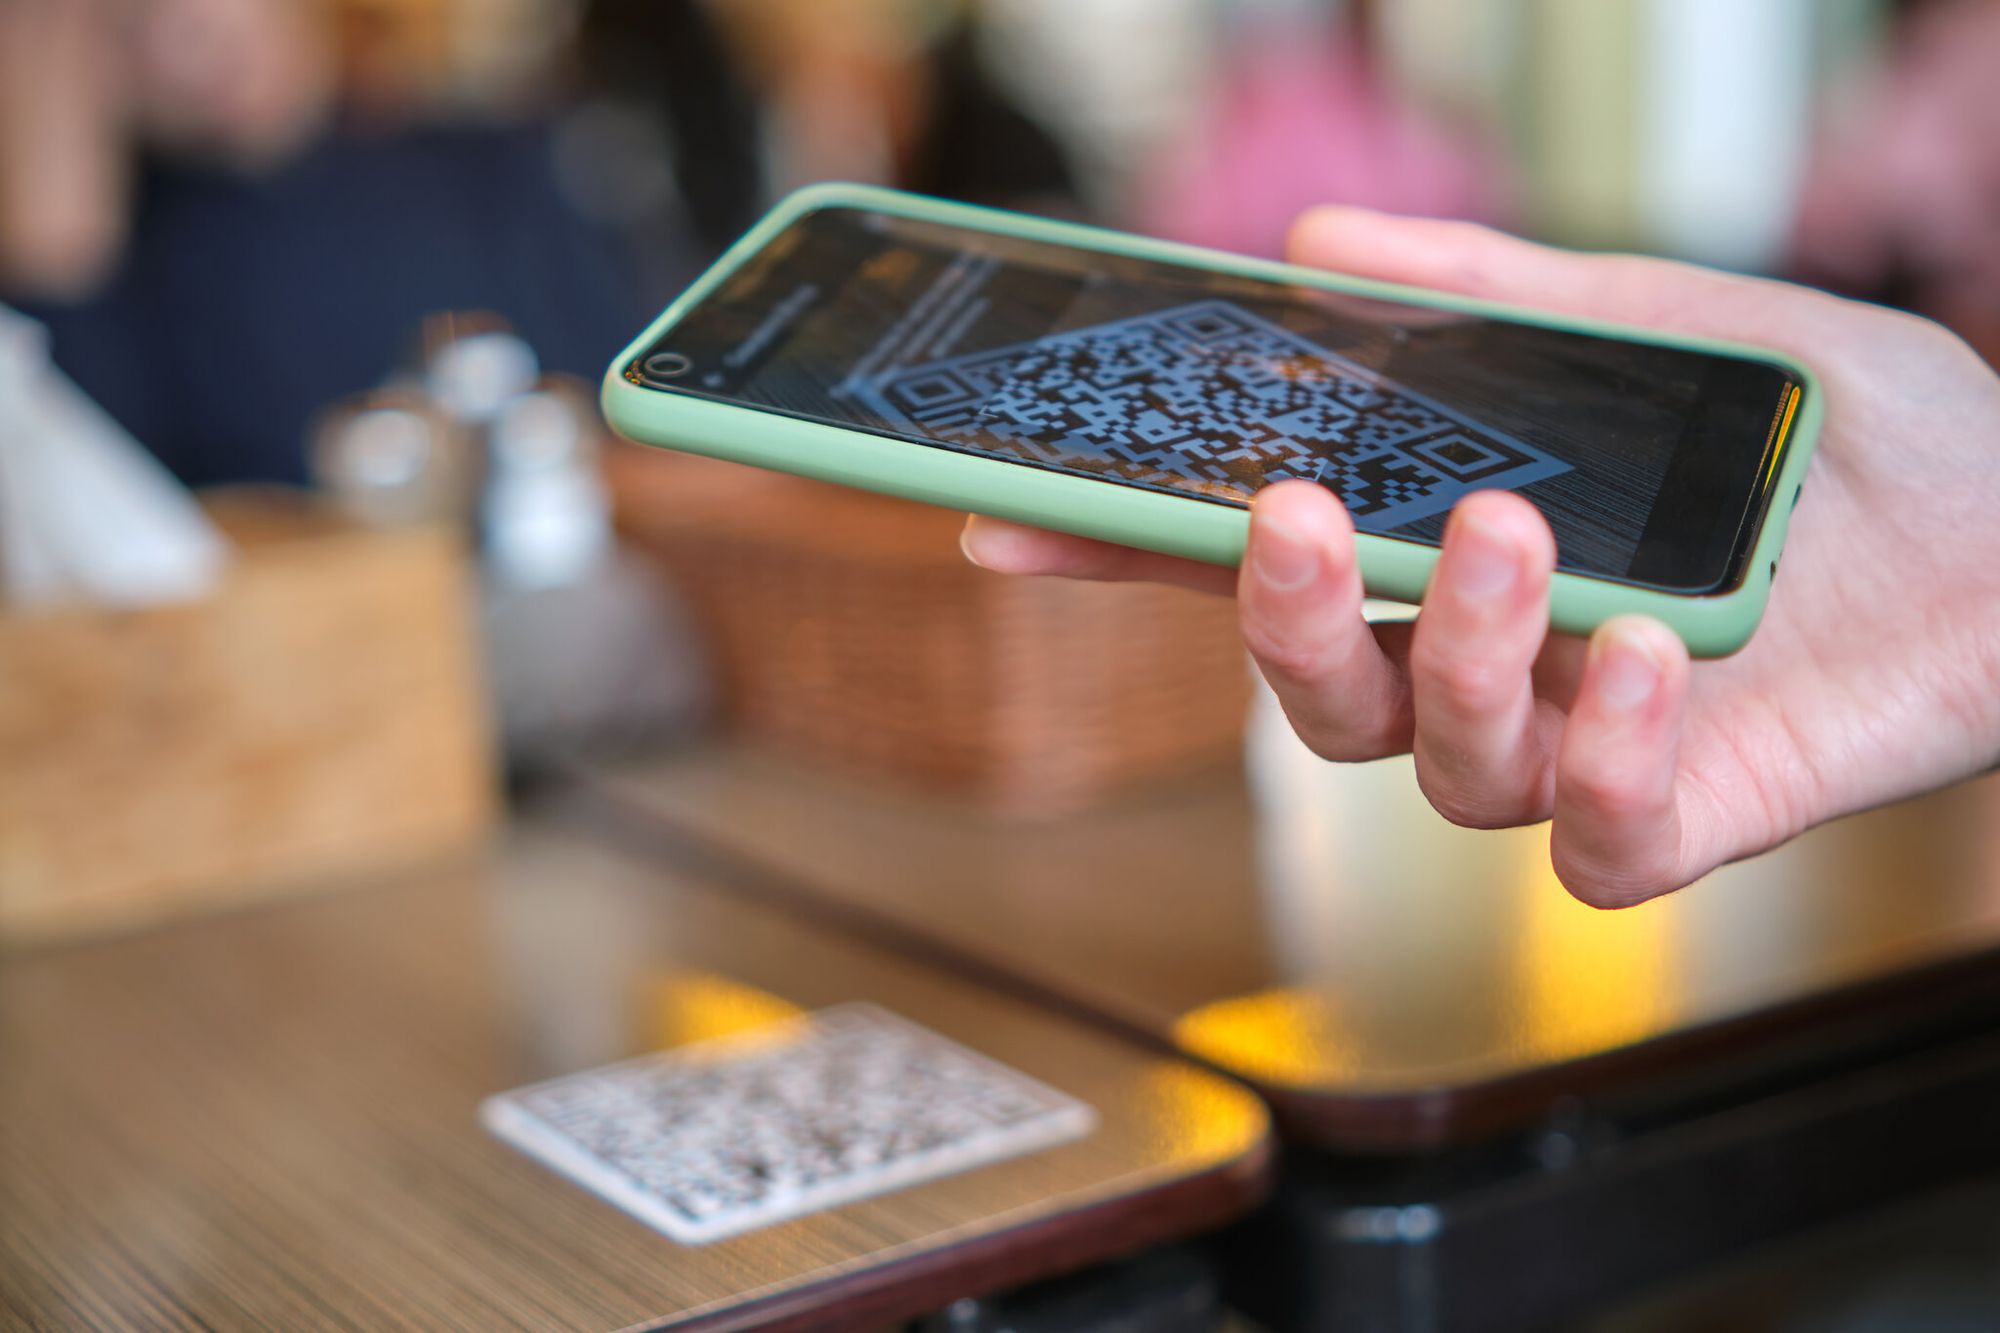 close up of hand scanning a QR code on a table